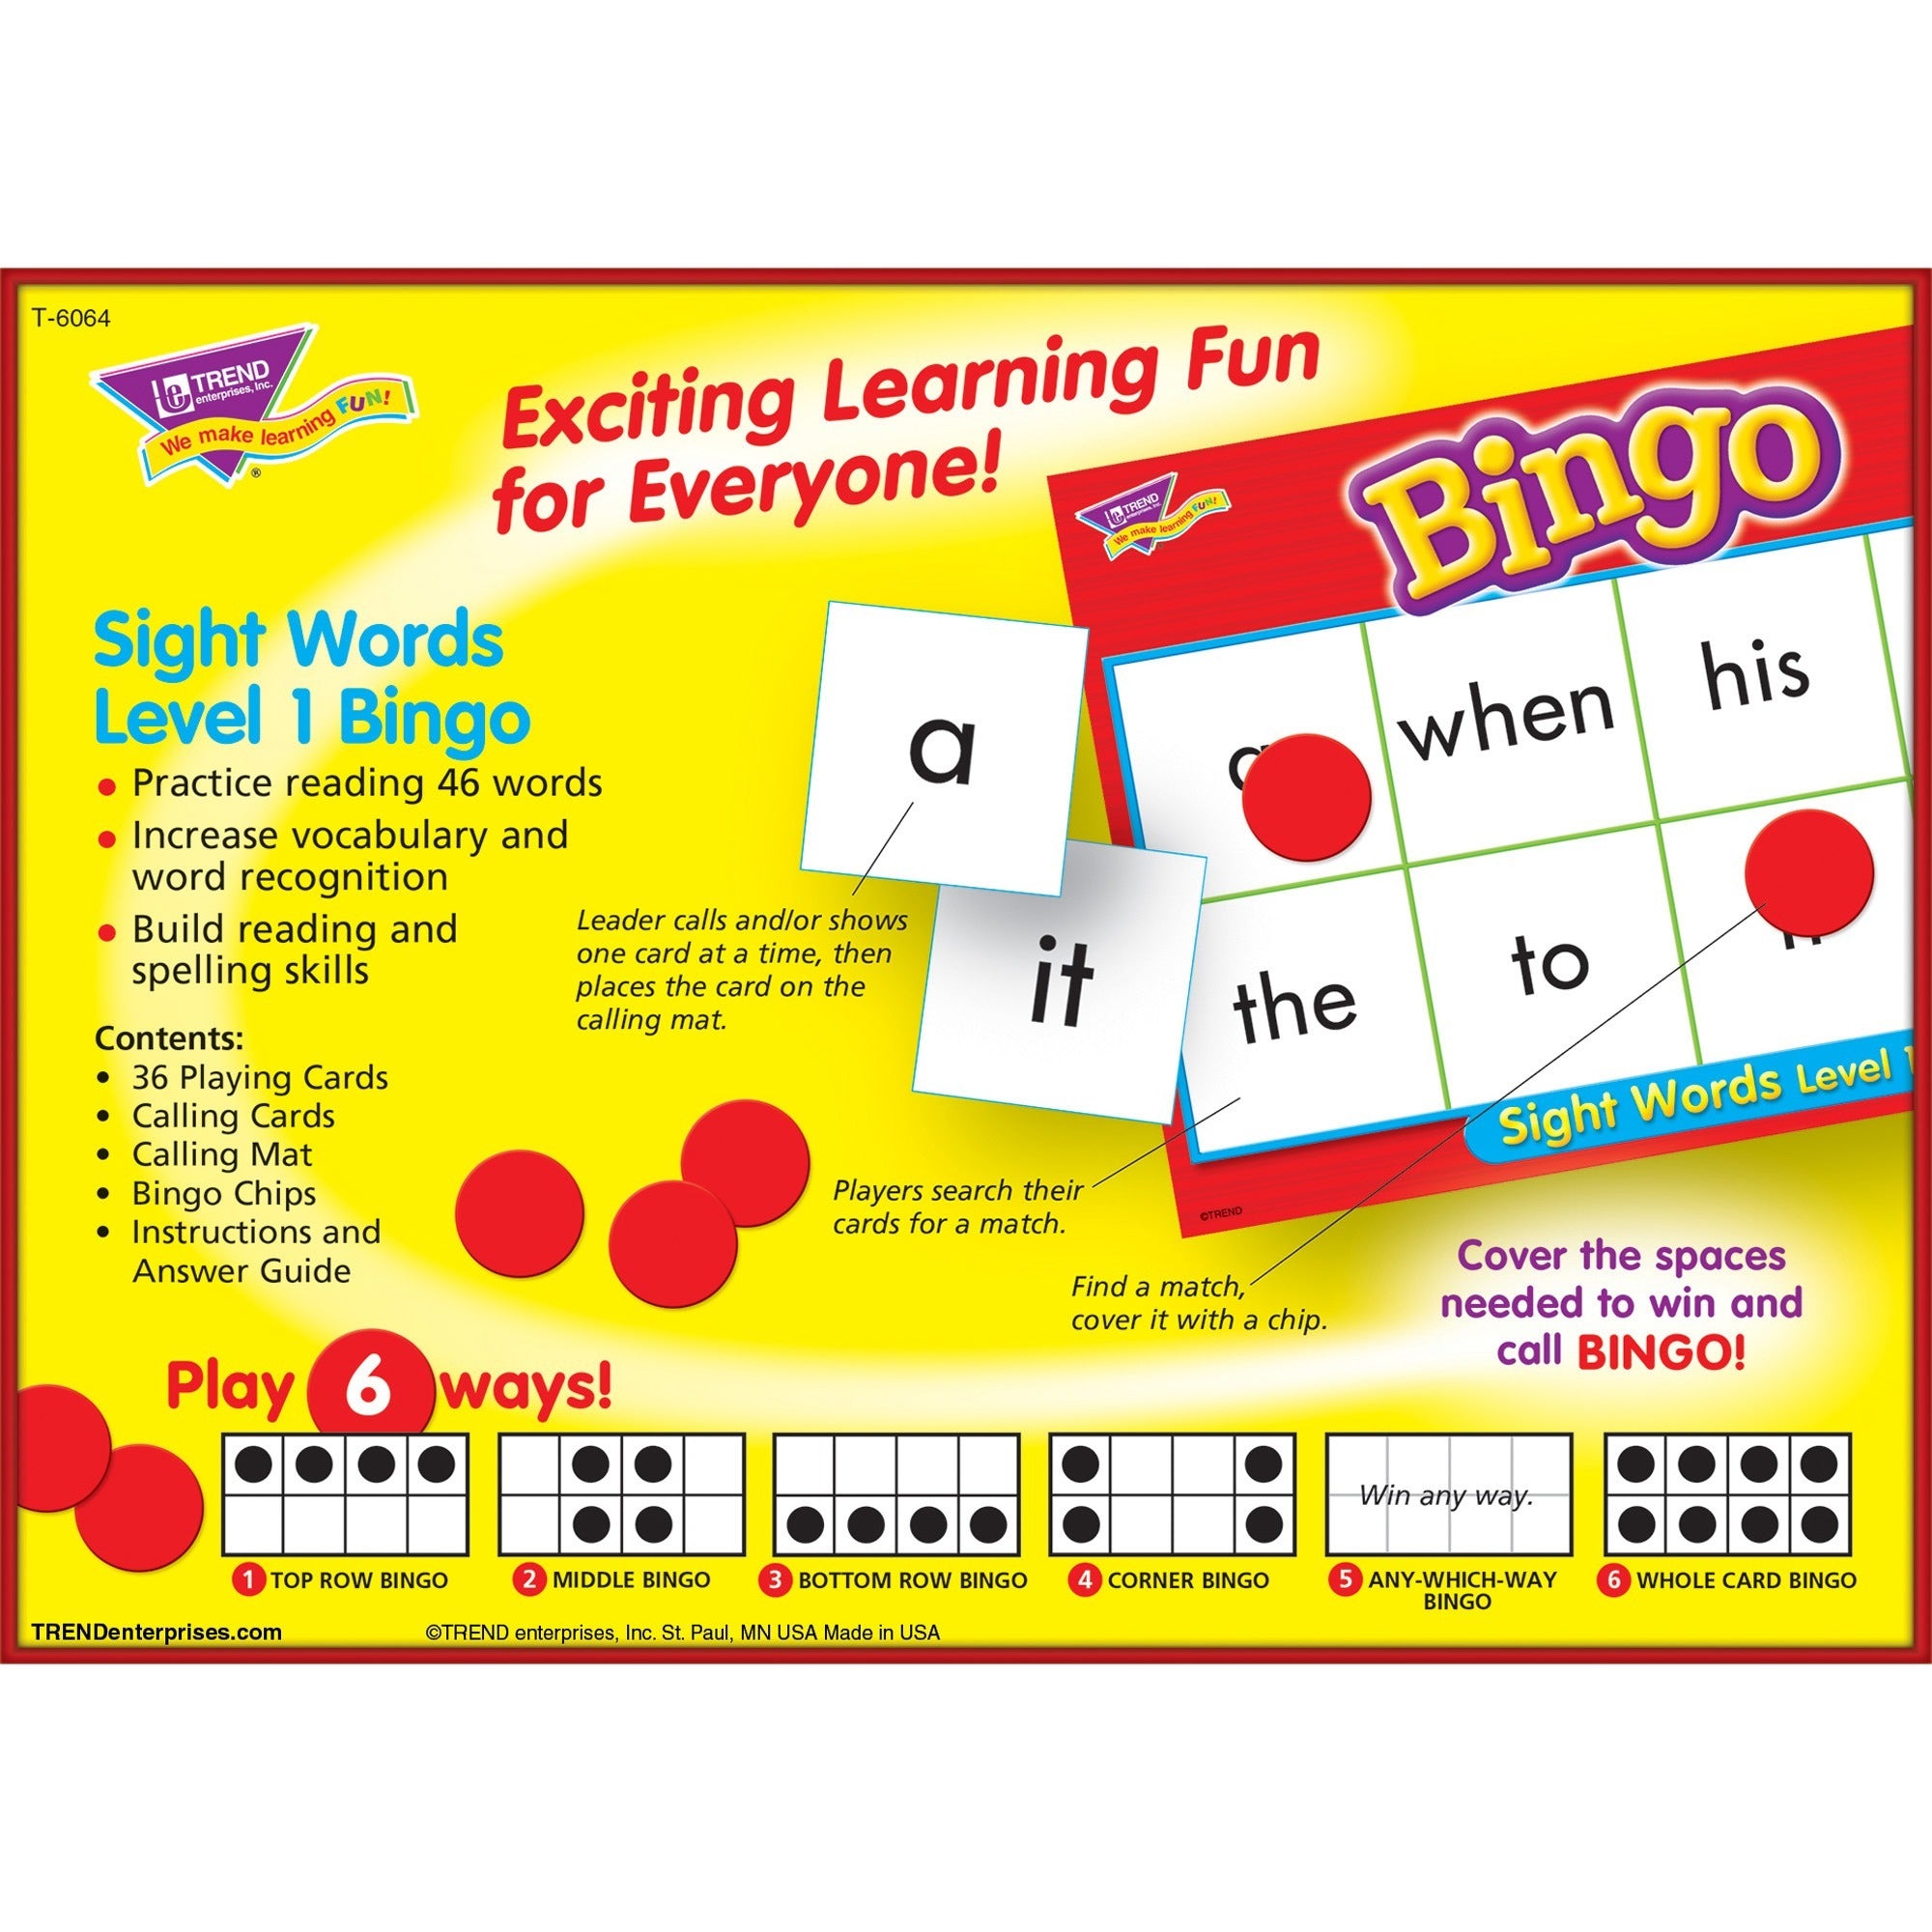 Trend Sight Words Bingo Game - Theme/Subject: Learning - Skill Learning: Reading, Vocabulary - 5-8 Year - Multi - 